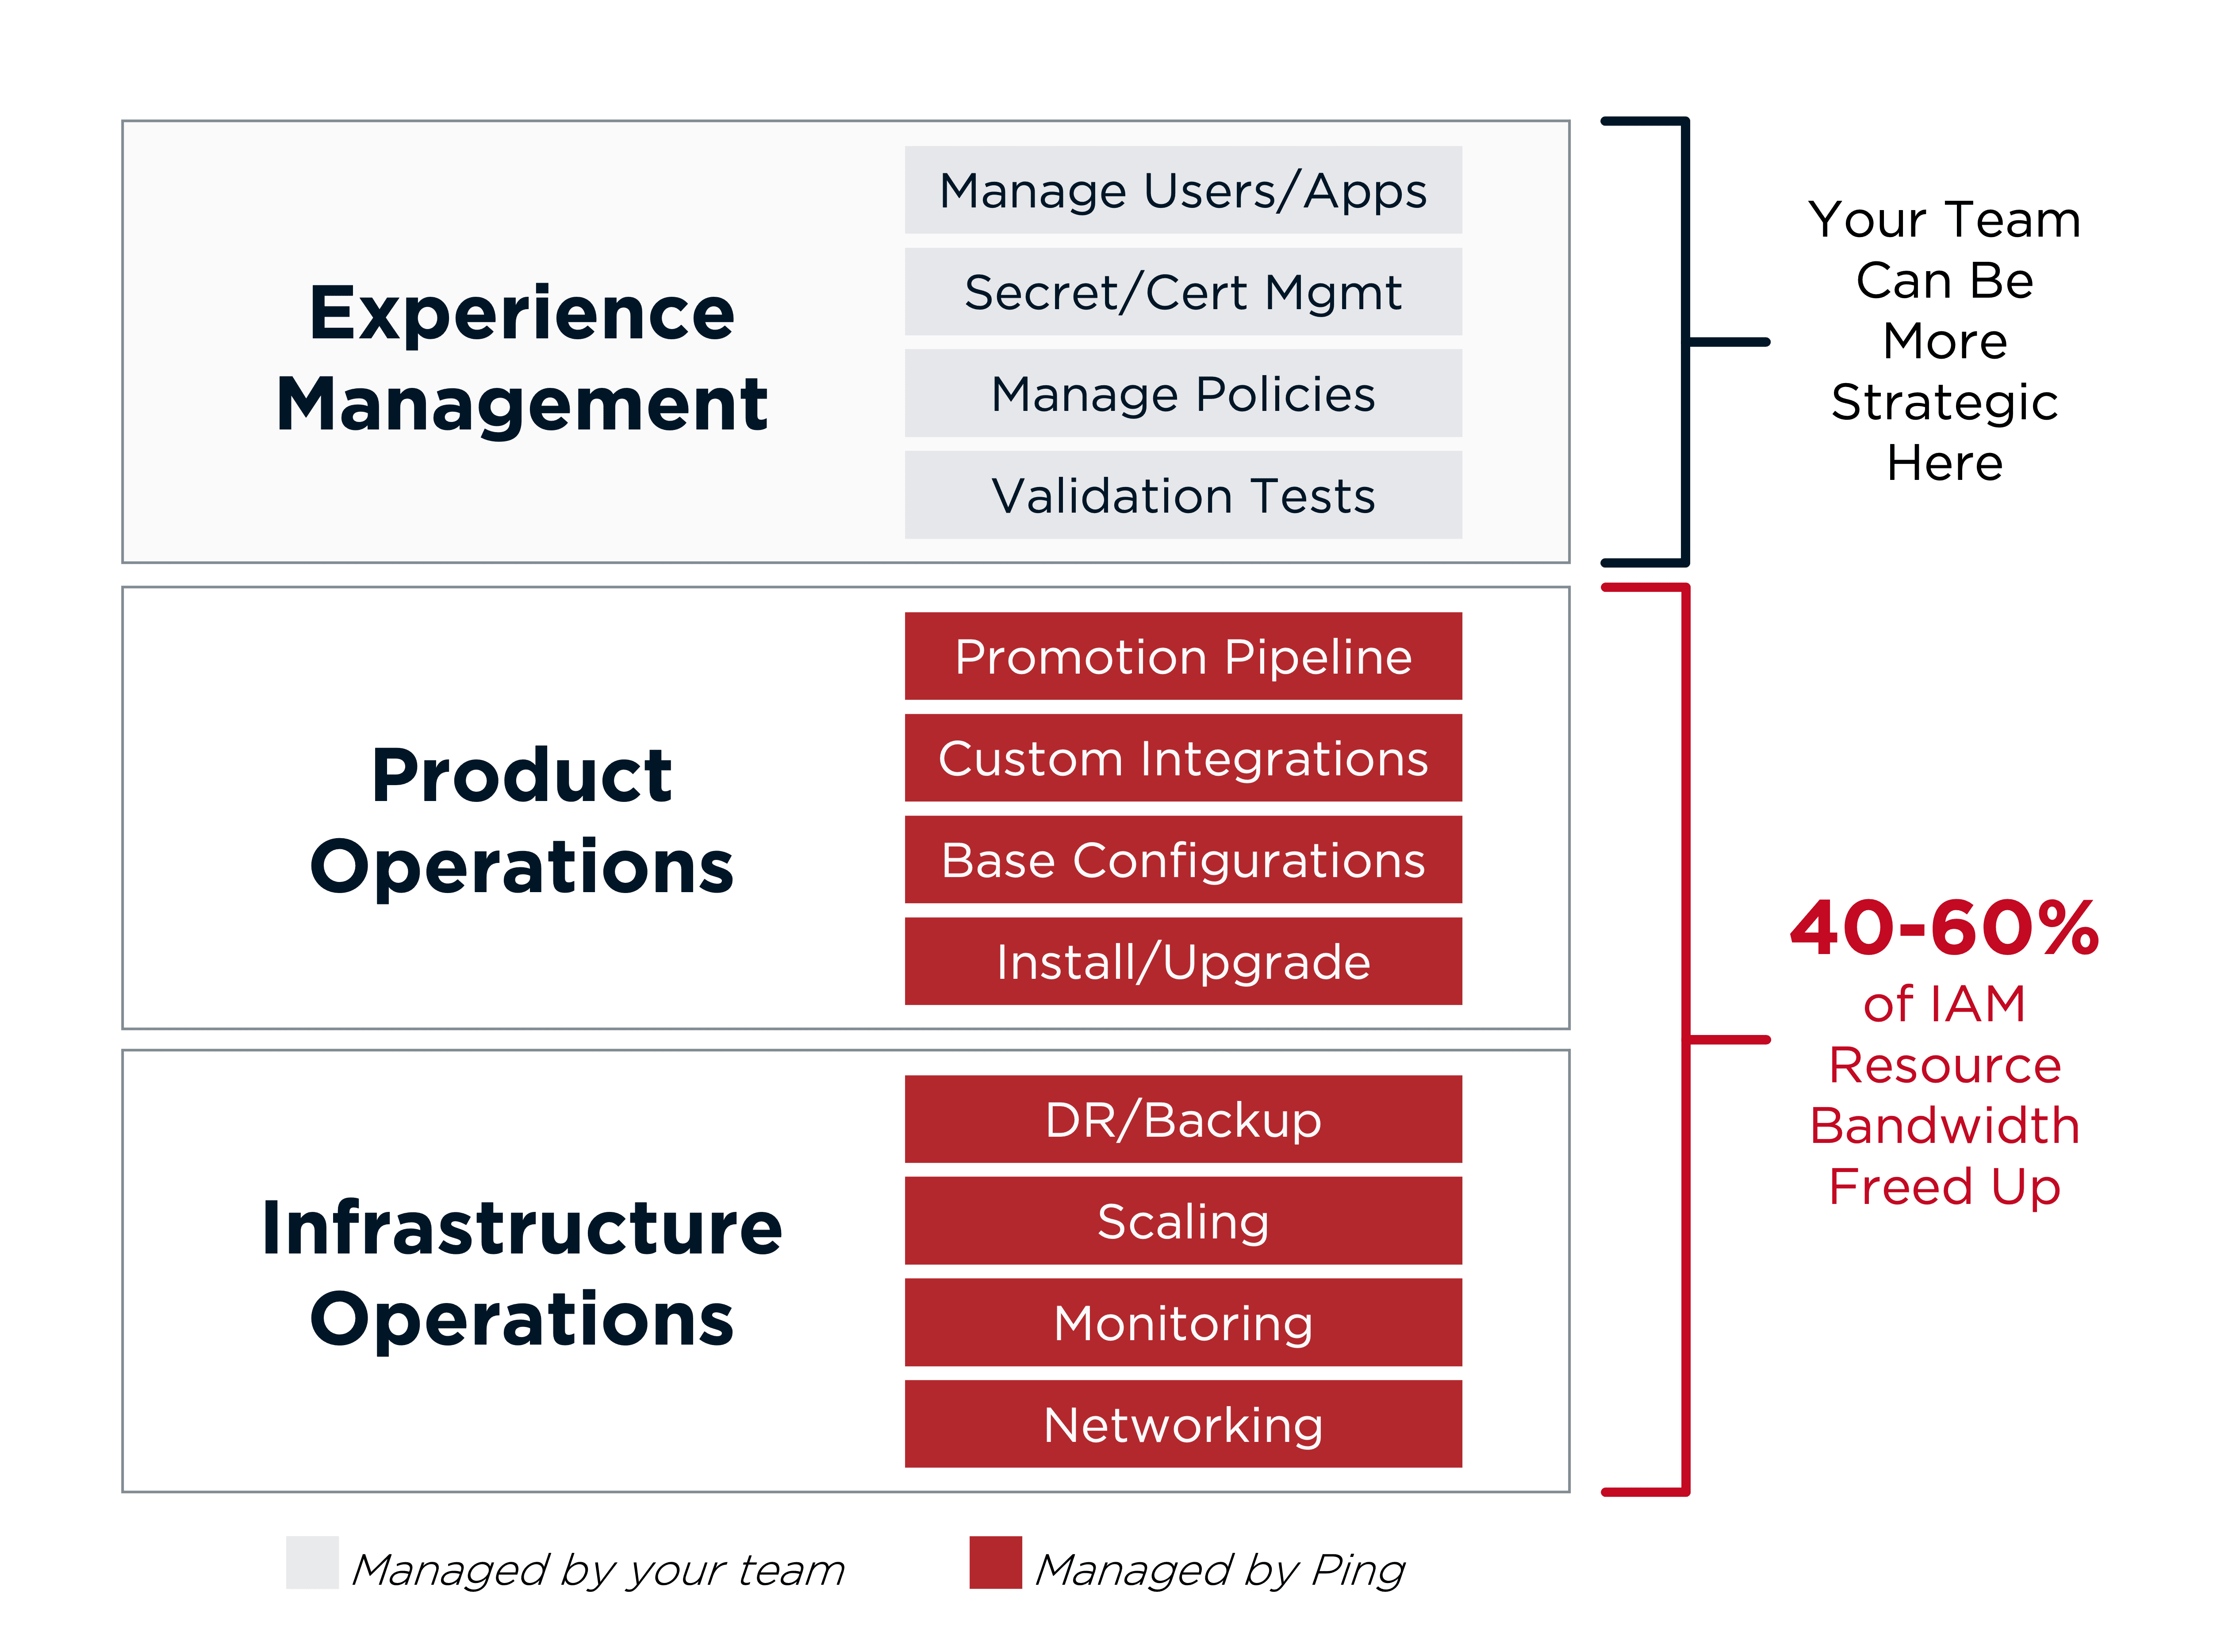 A description of the three general areas of software management responsibility, showing that Ping takes over management of Product and Infrastructure operations